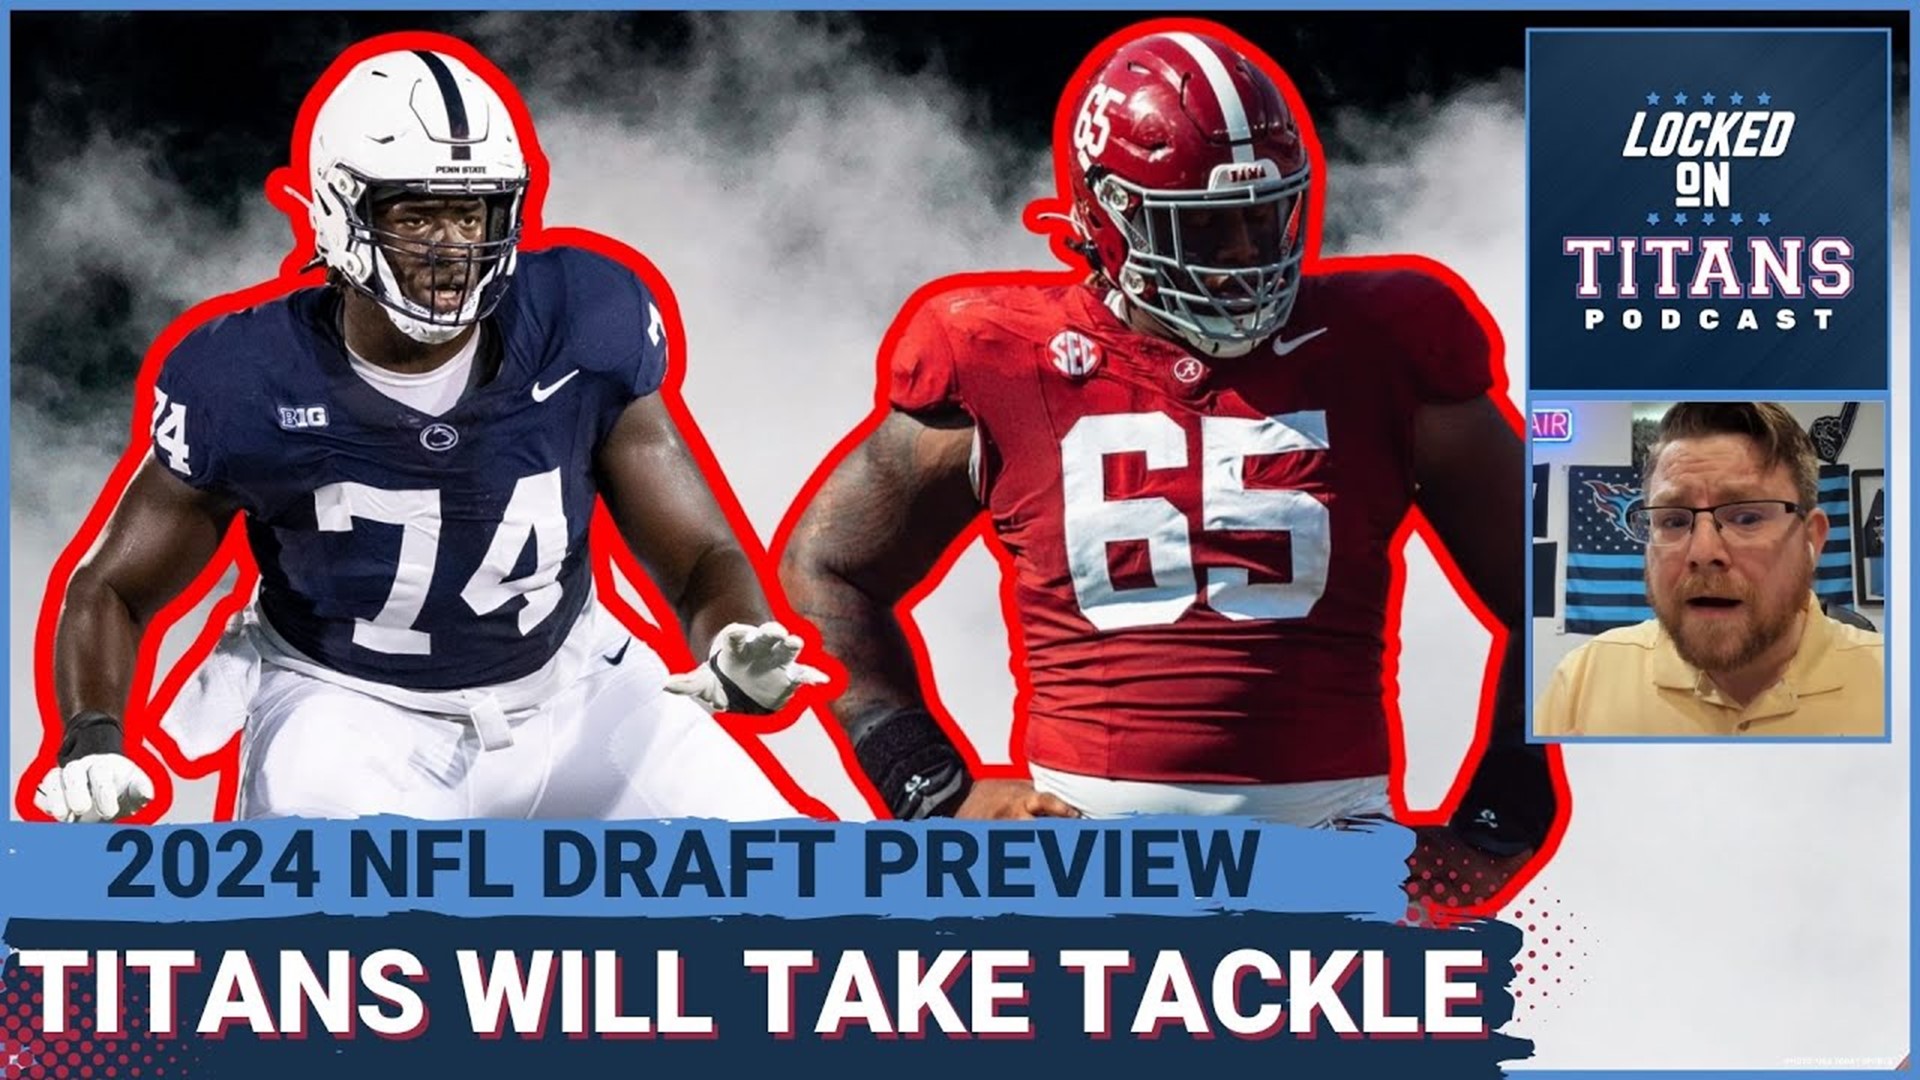 The Tennessee Titans have wrapped up their pre-draft visits and if one thing is for certain, it's that they will be selecting an offensive tackle in Round 1.